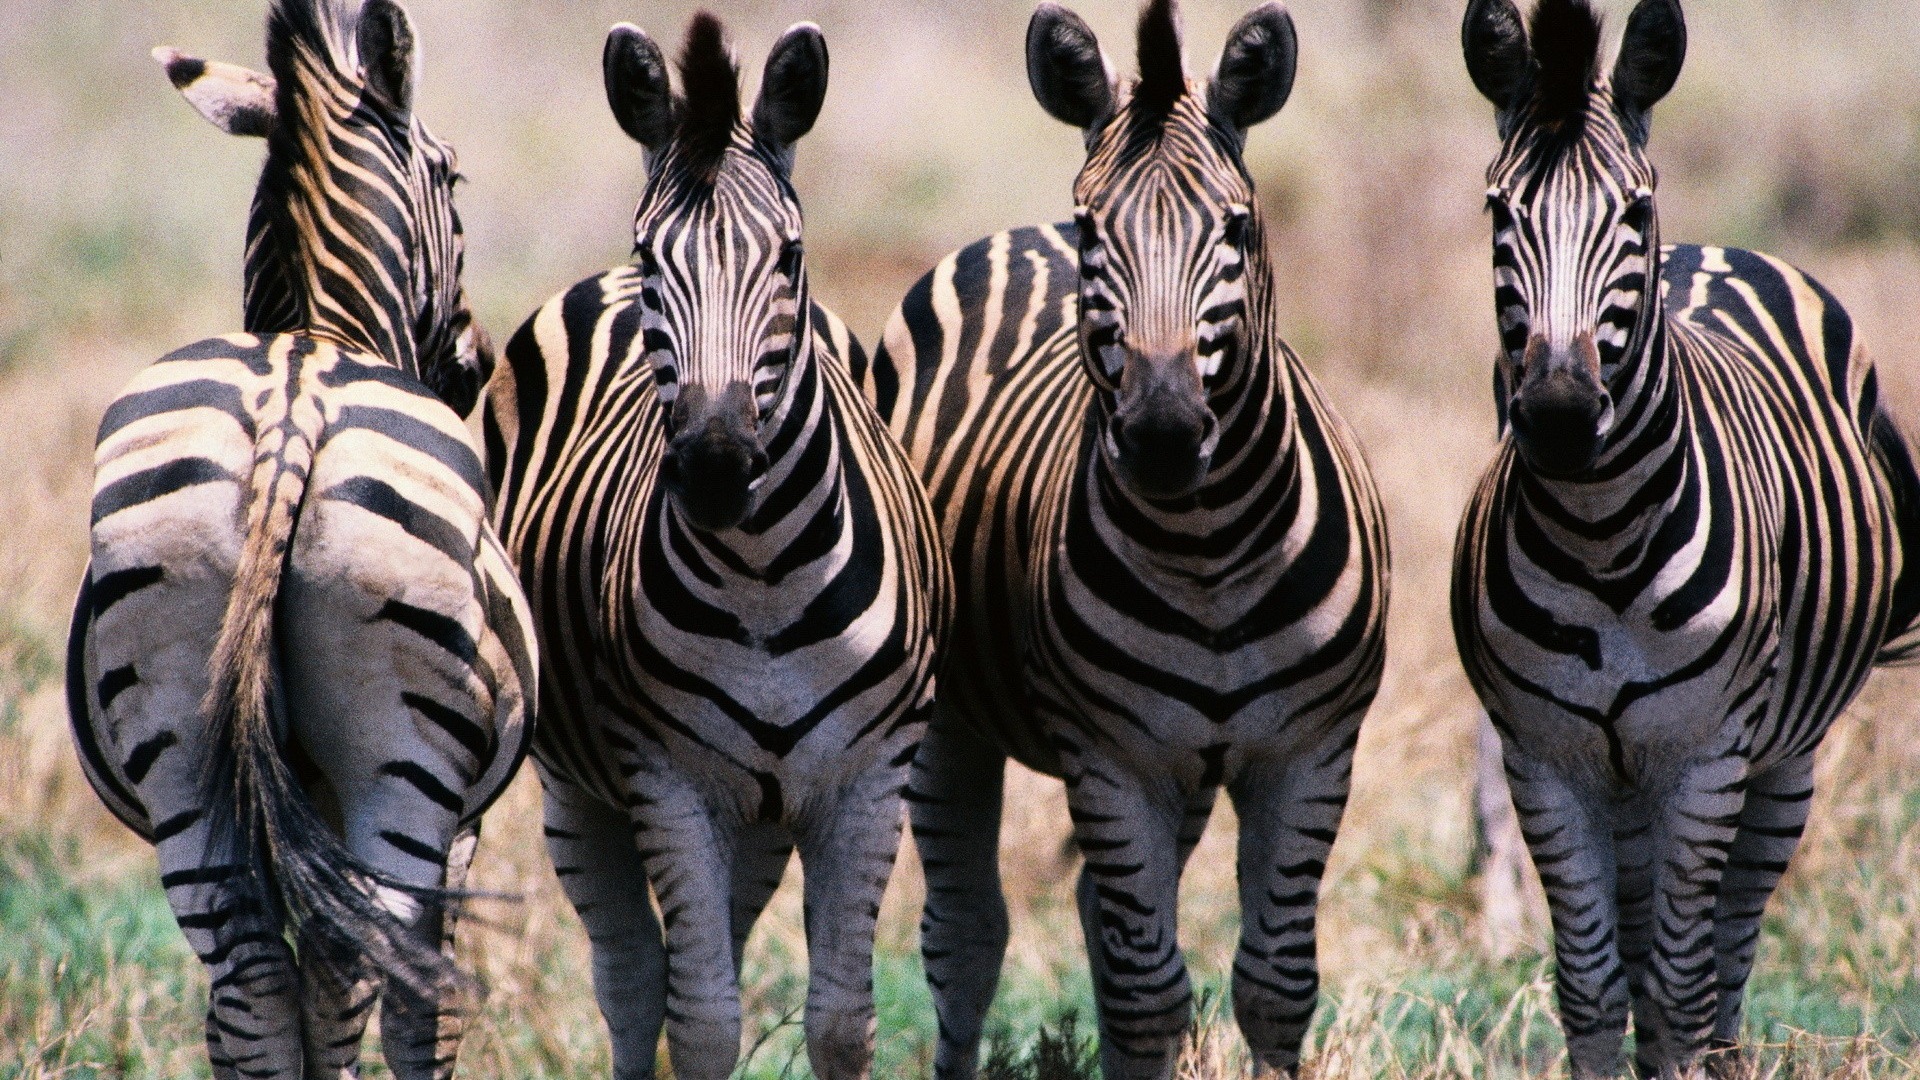 Black and white striped animal, zebra HD wallpapers #5 - 1920x1080